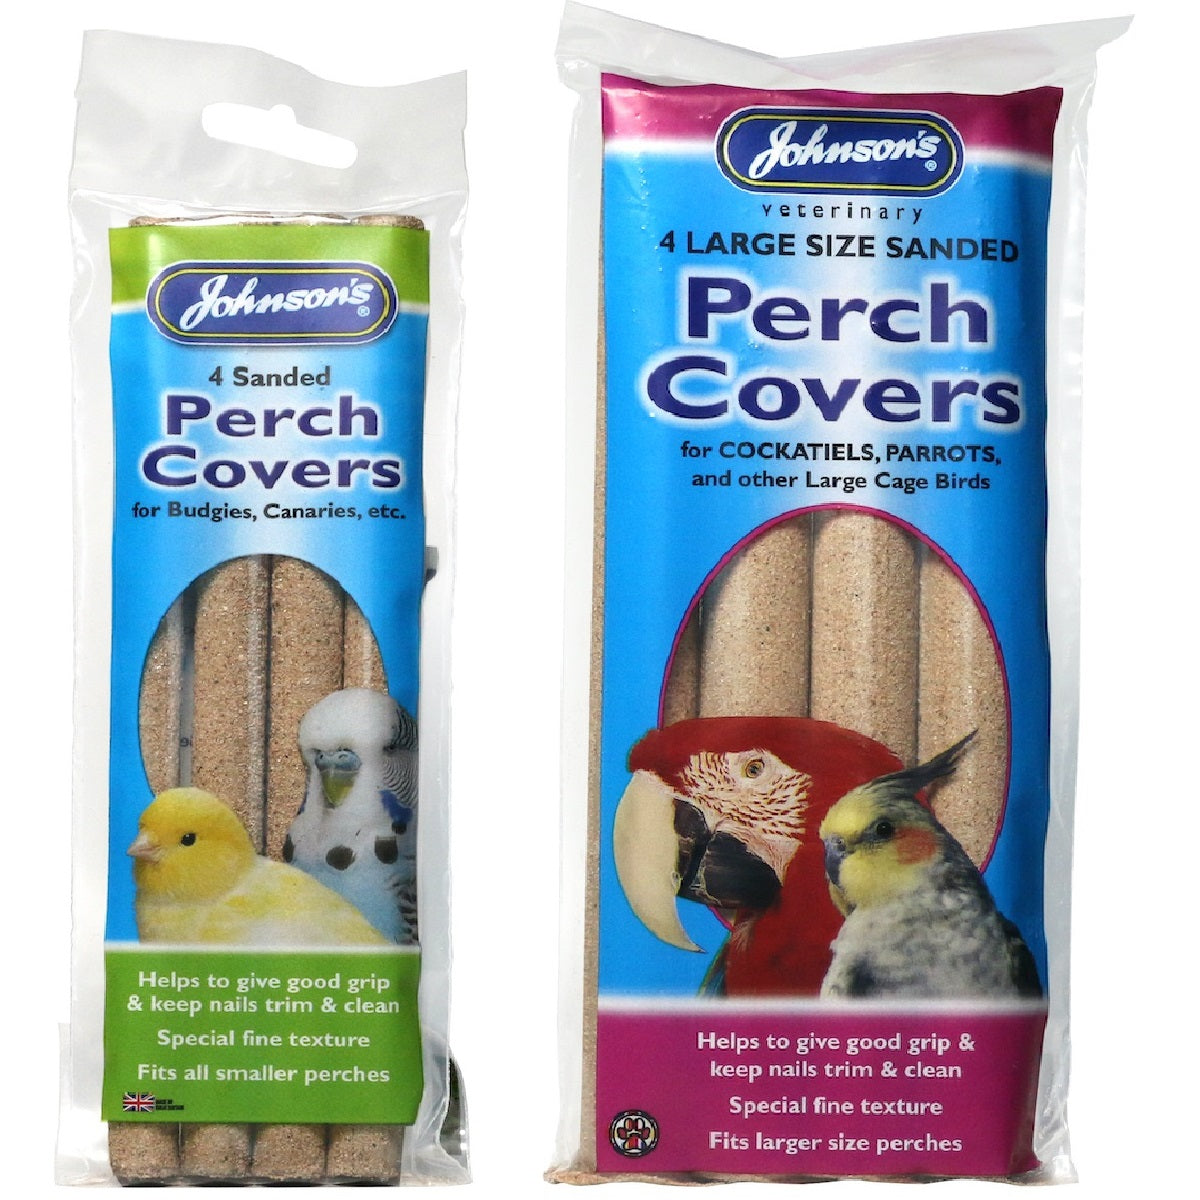 Johnson's - Sanded Perch Covers